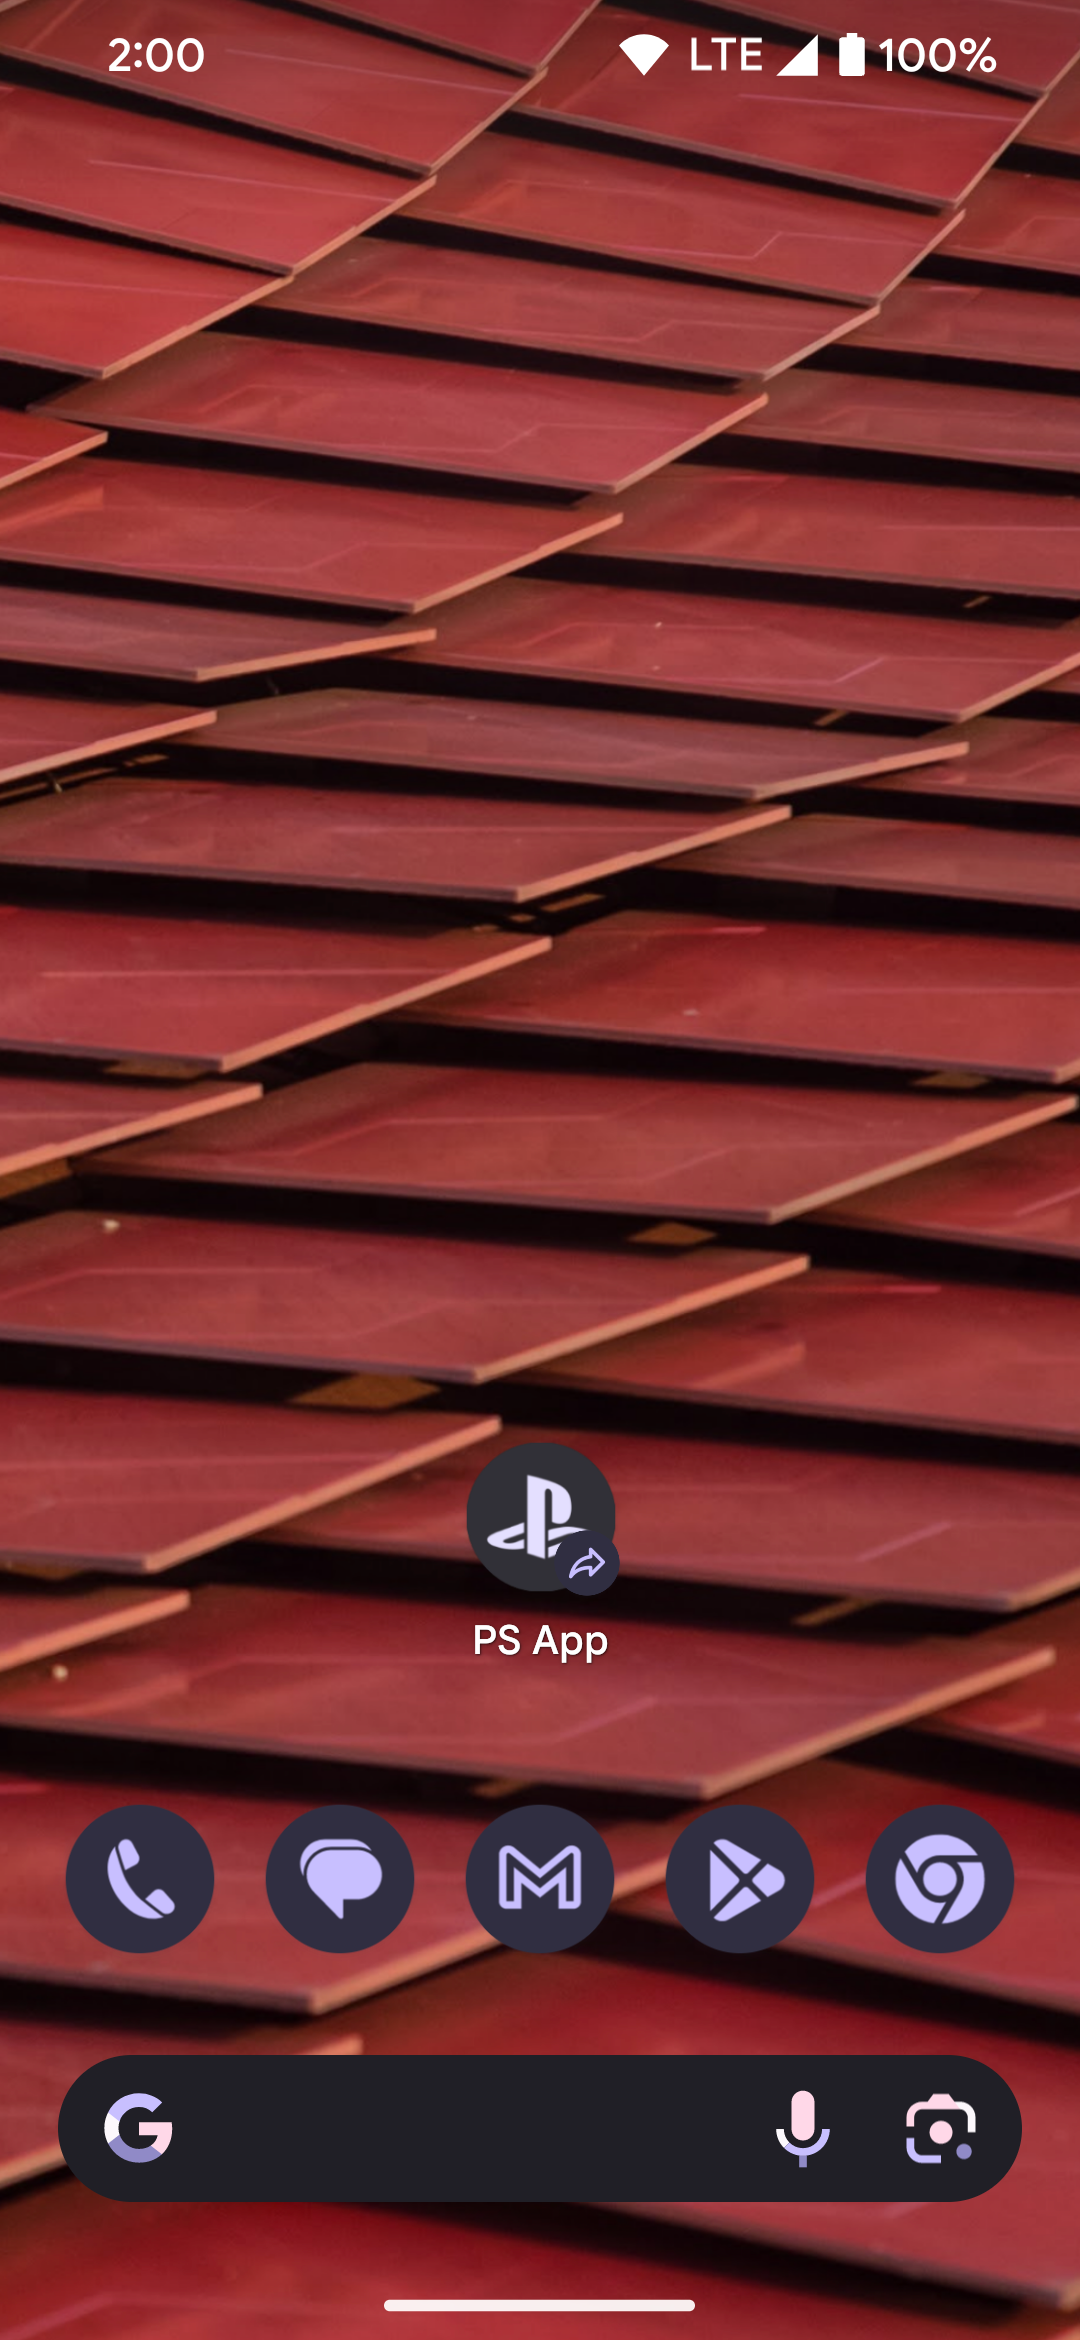 The new dark themed icon for the PS App is now added to the home screen